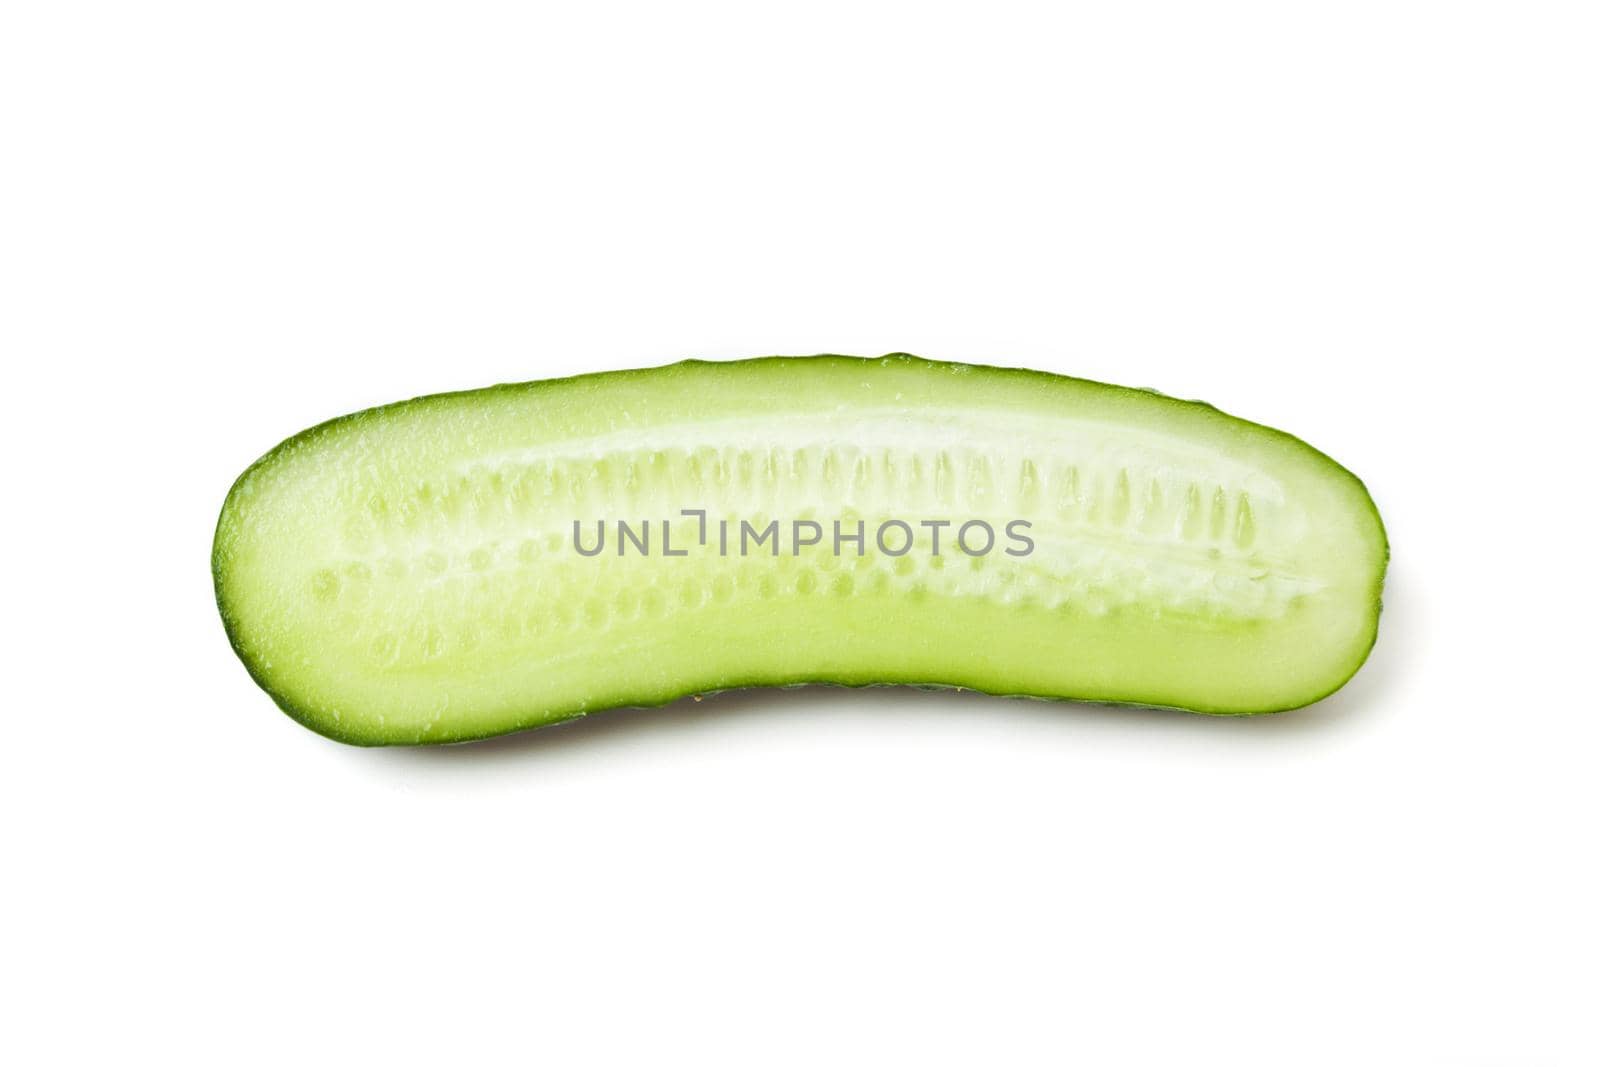 One halve of fresh green cucumber isolated on a white background by SlayCer